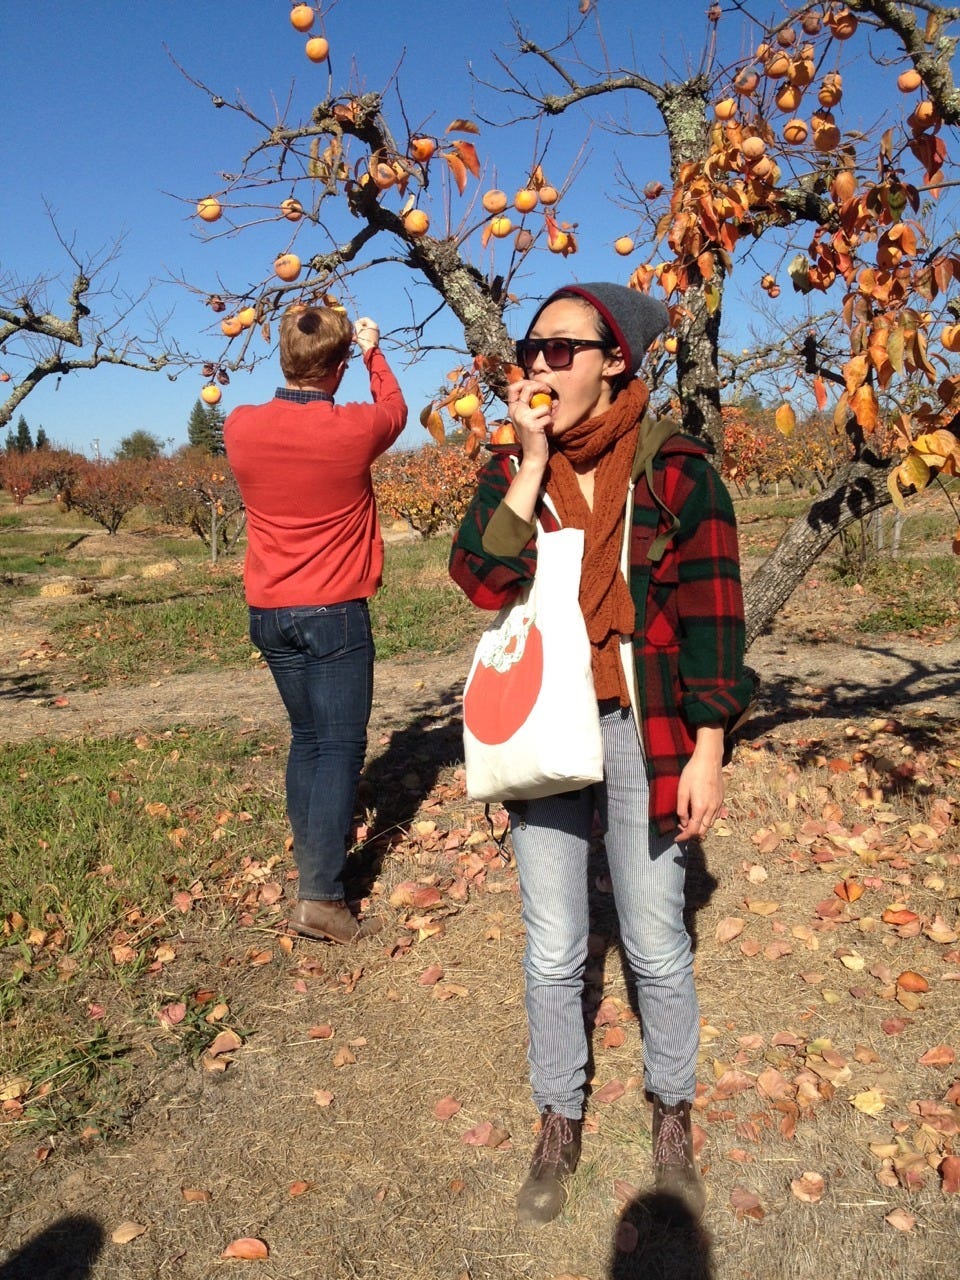 Our trip to Otow Orchard was easily one of my favorite days in 2013. I have never flipped out over fruit quite like I did that day. And yes, Tif and I wore persimmon-themed things.
Happy Persimmon Christmas, aka Persimmas!